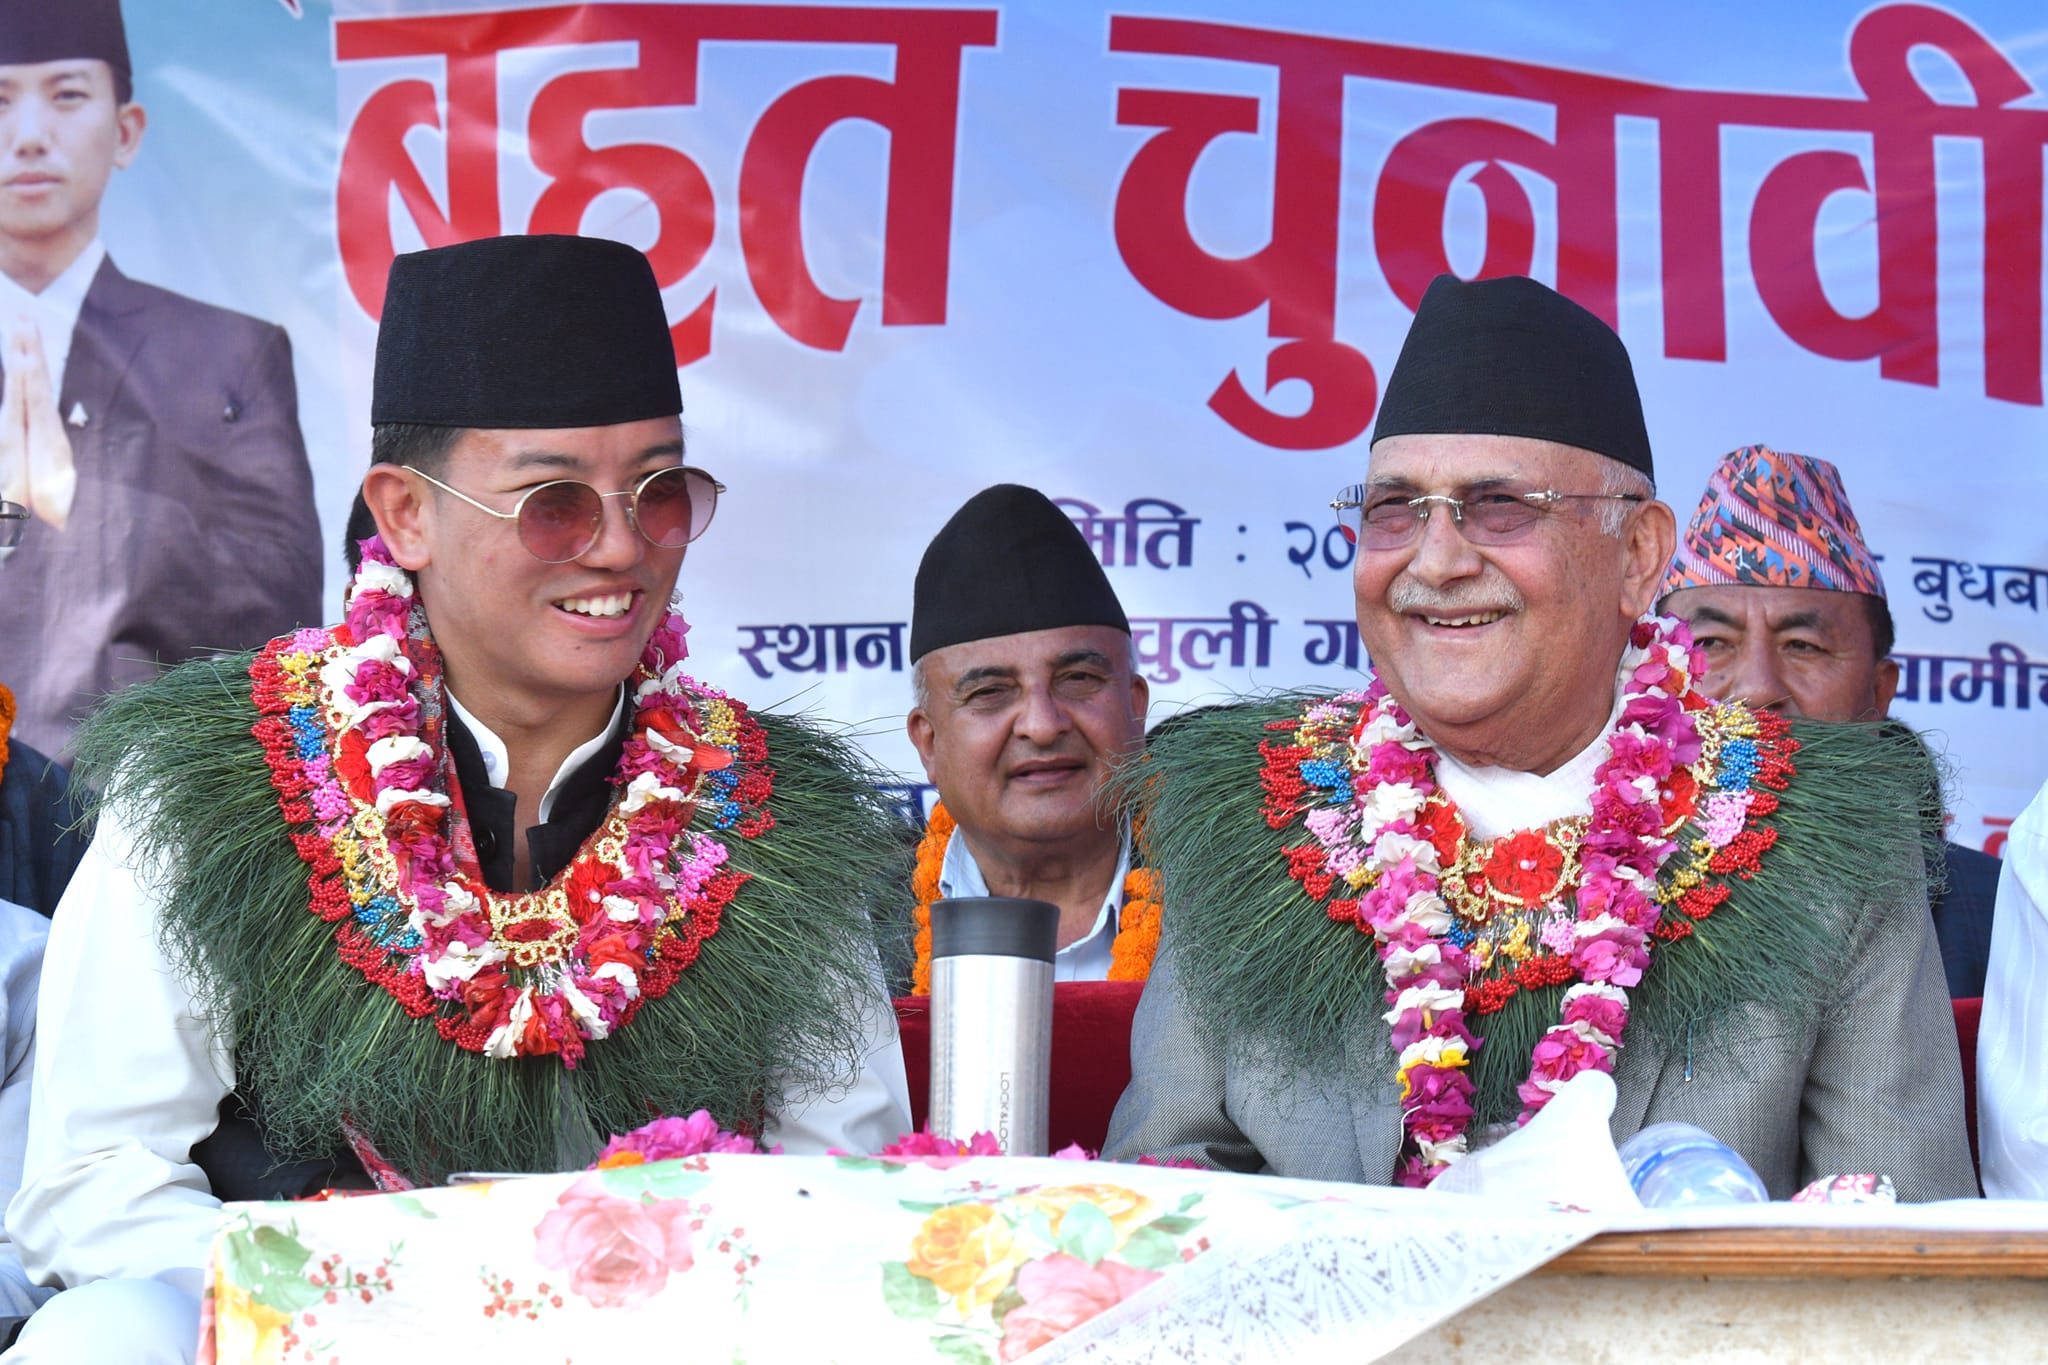 CPN-UML to host victory celebration in Ilam, Chairman Oli to address the gathering